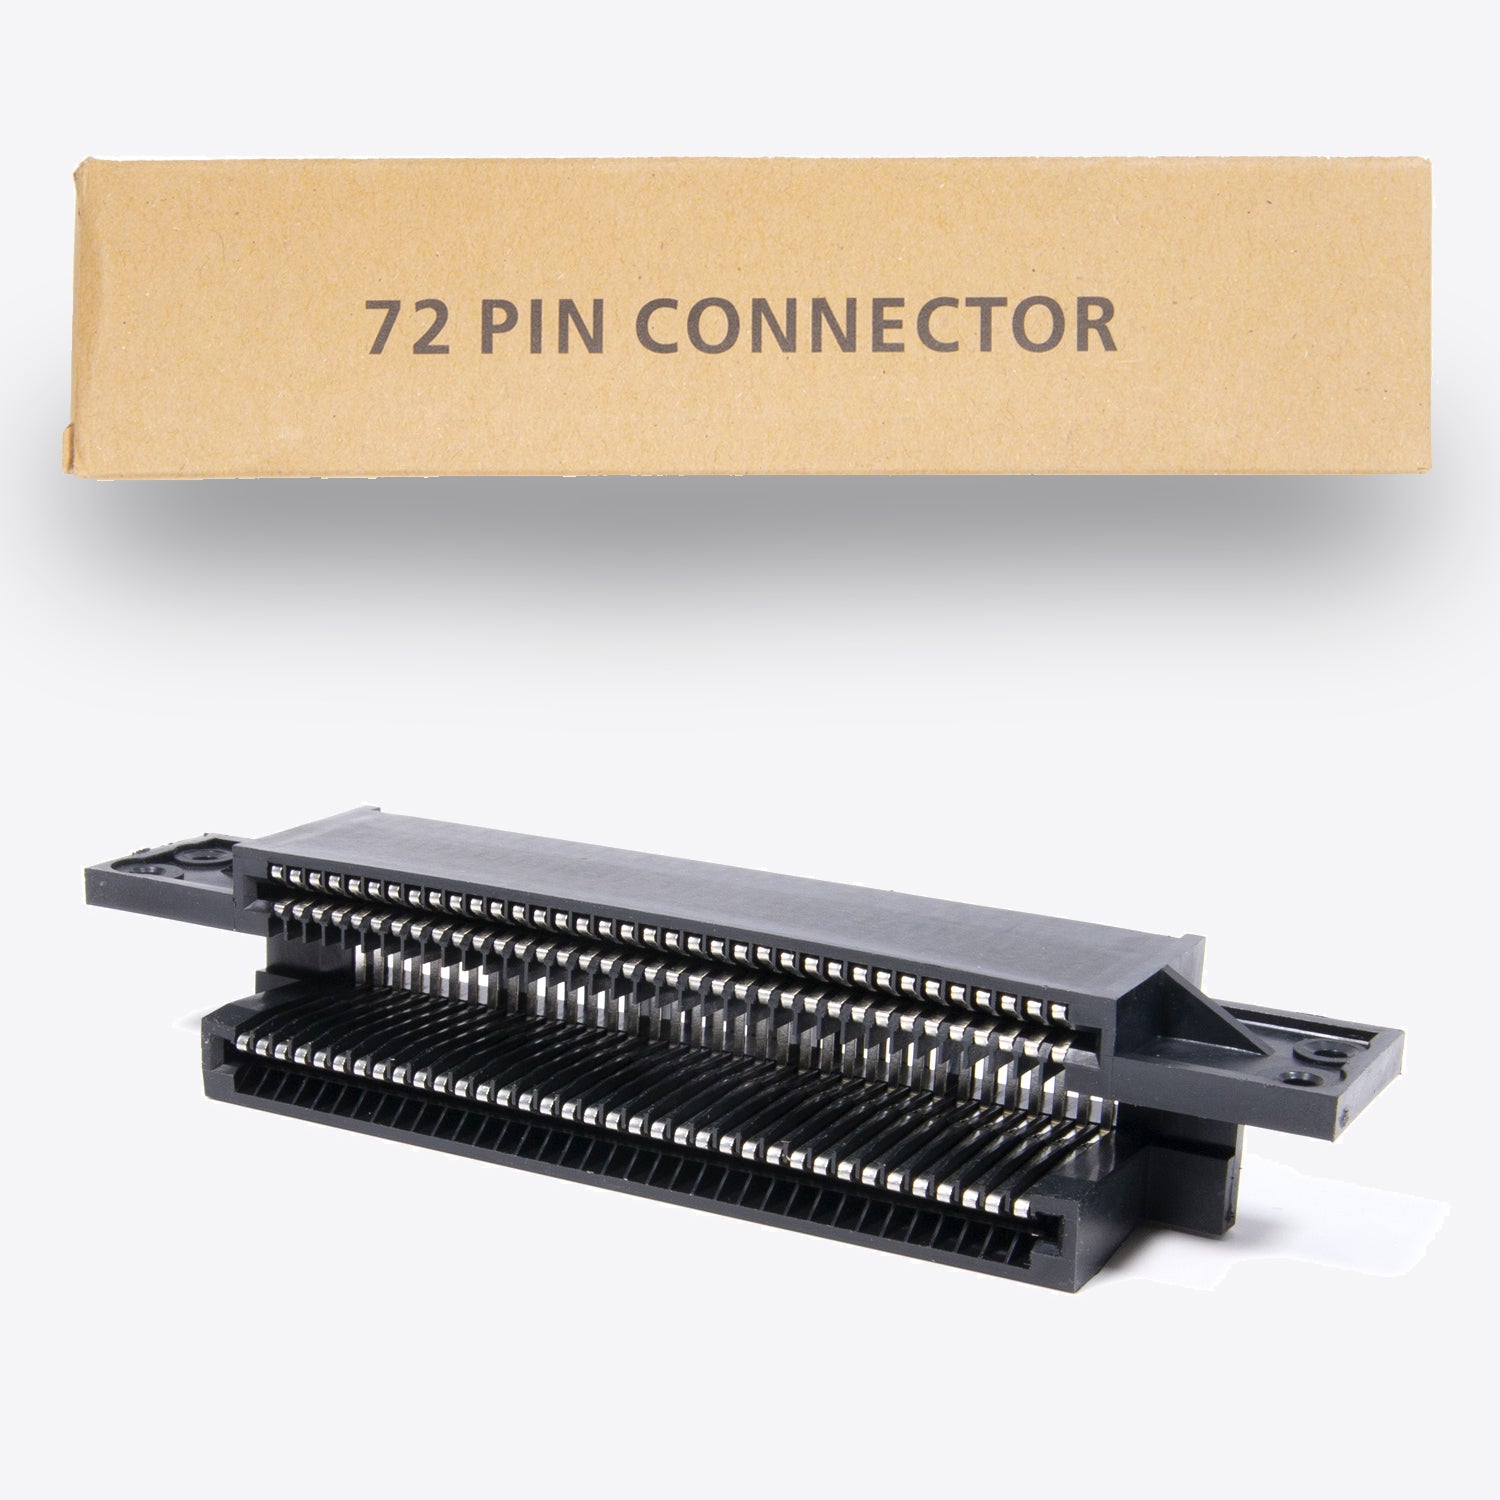 72 Pin Connector